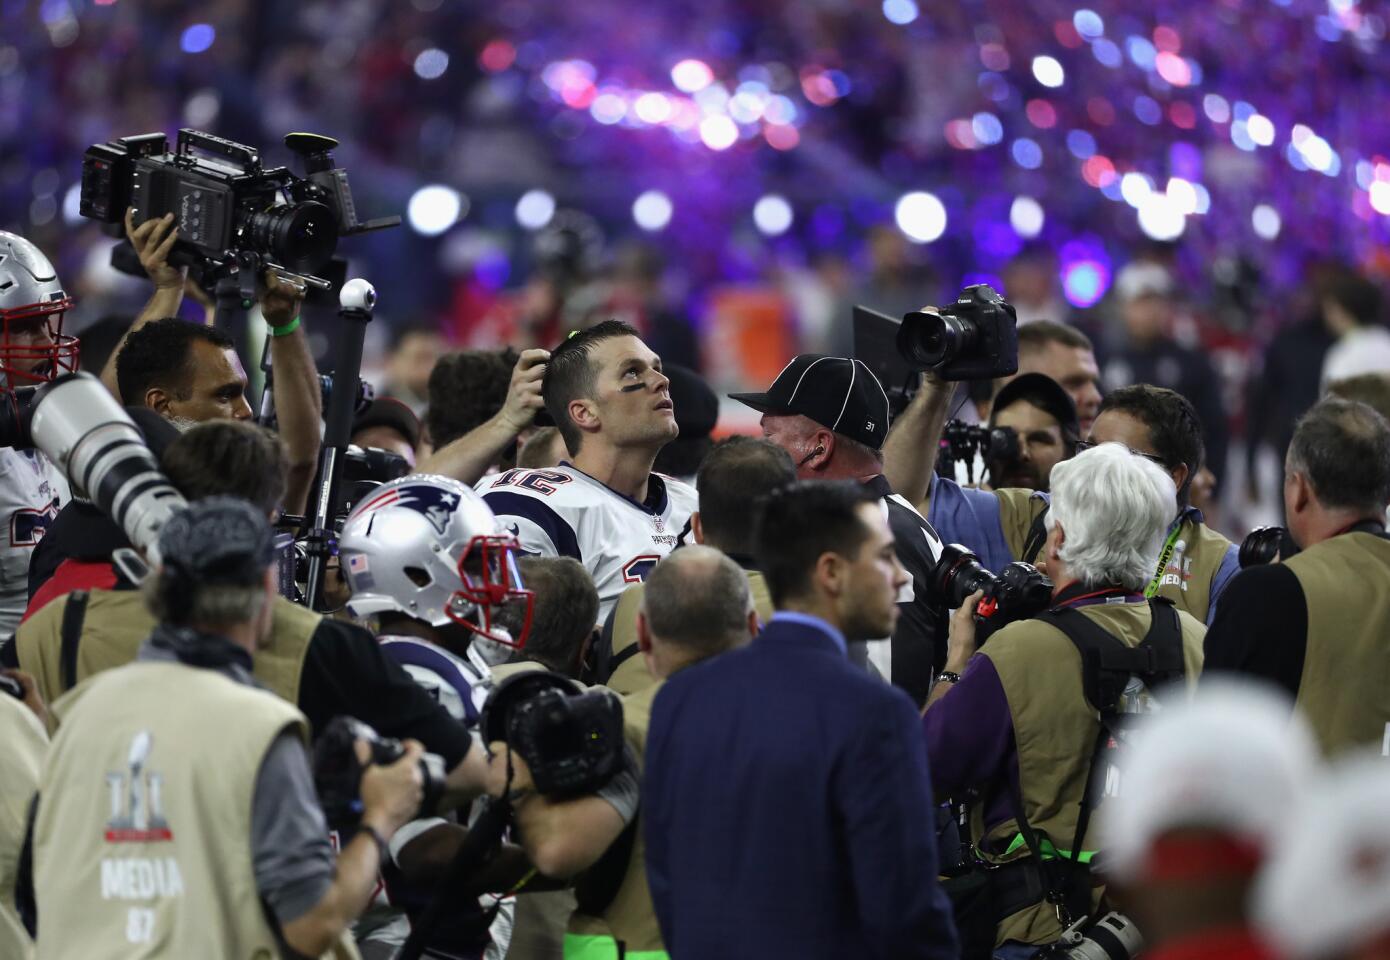 Patriots quarterback Tom Brady is surrounded by reporters and photographers after defeating the Falcons, 34-28, in overtime of Super Bowl LI.